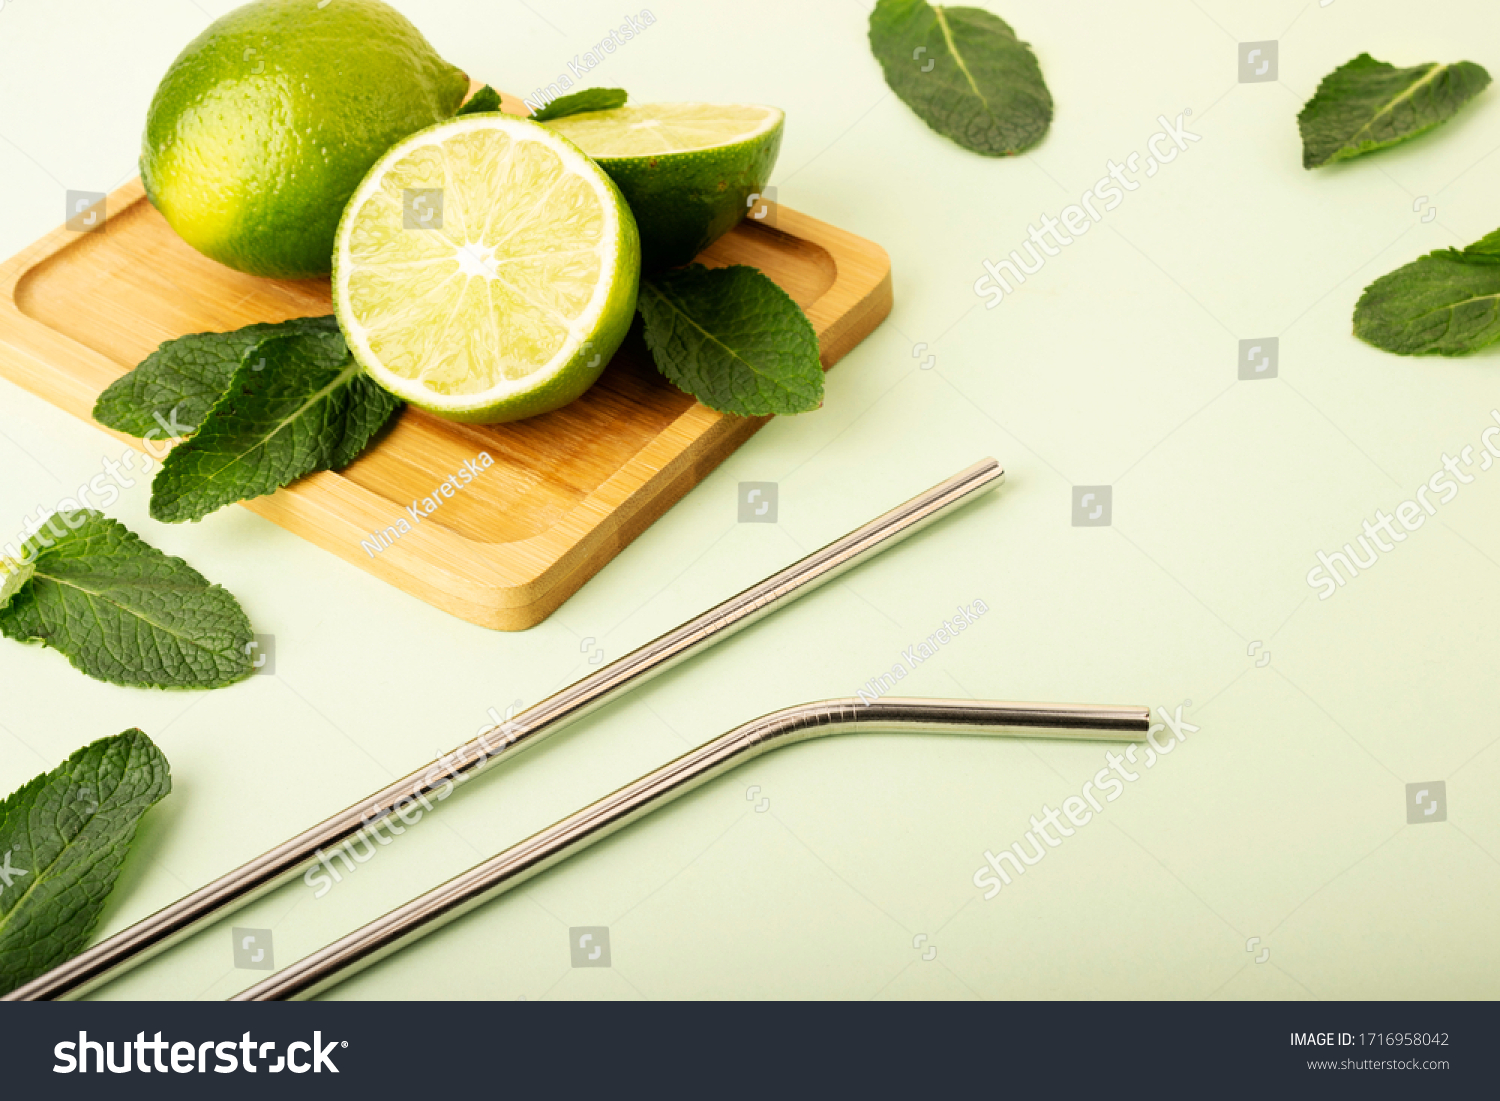 Reusable metal straws on a pastel background. Fresh lime and mint fruits lie on a wooden stand. Green color and fruts emphasize. Reusable environmental products, zero waste.Eco products #1716958042